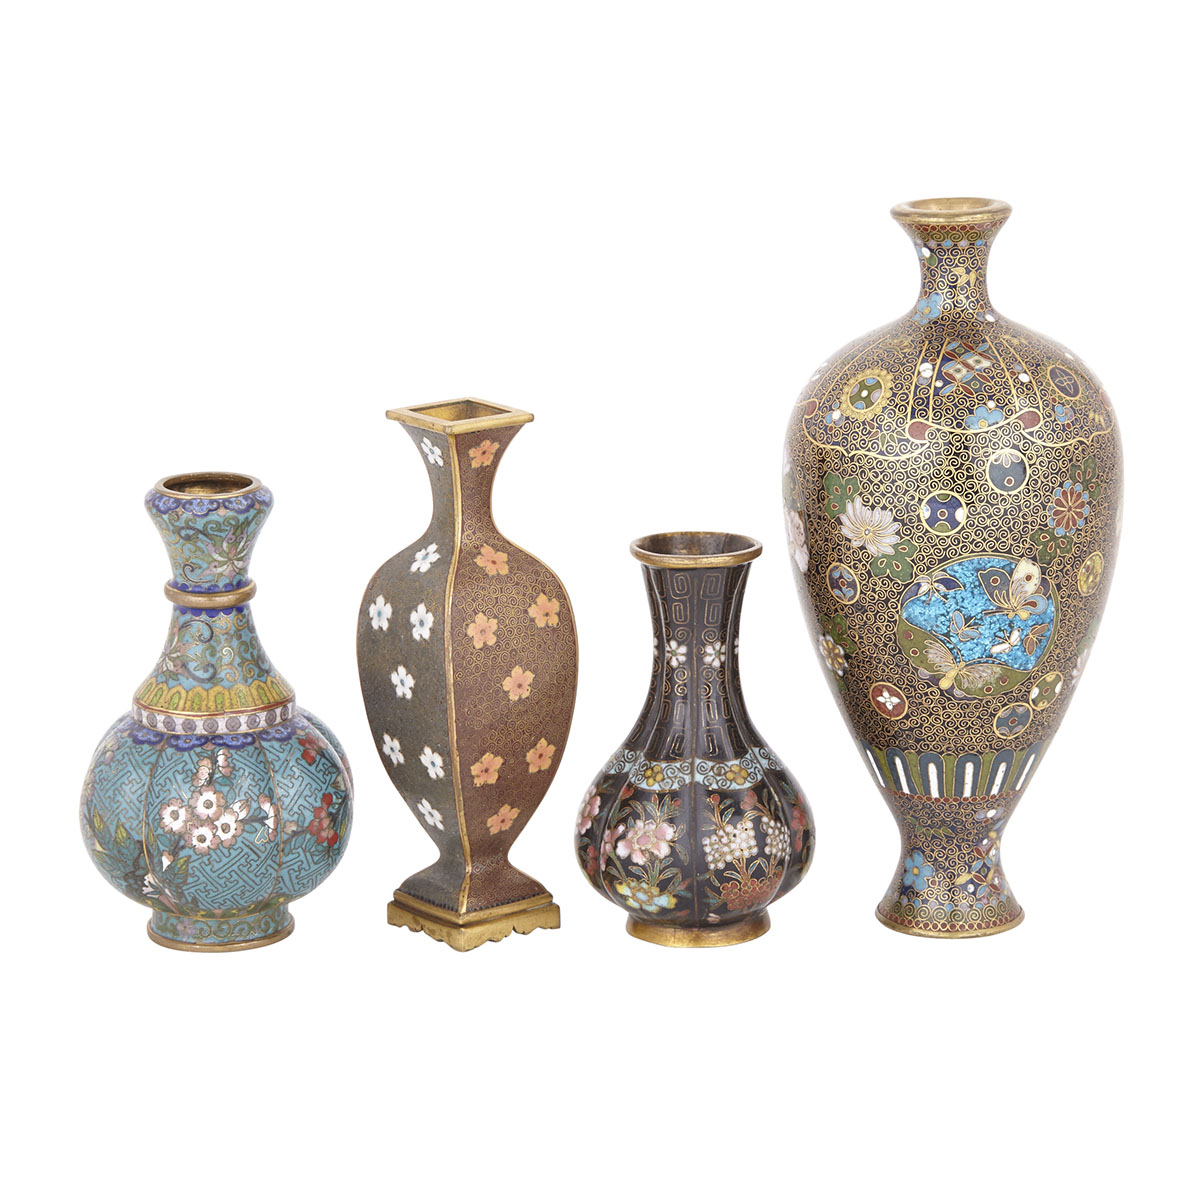 Group of Four Cloisonné Miniature Vases, Early 20th Century 